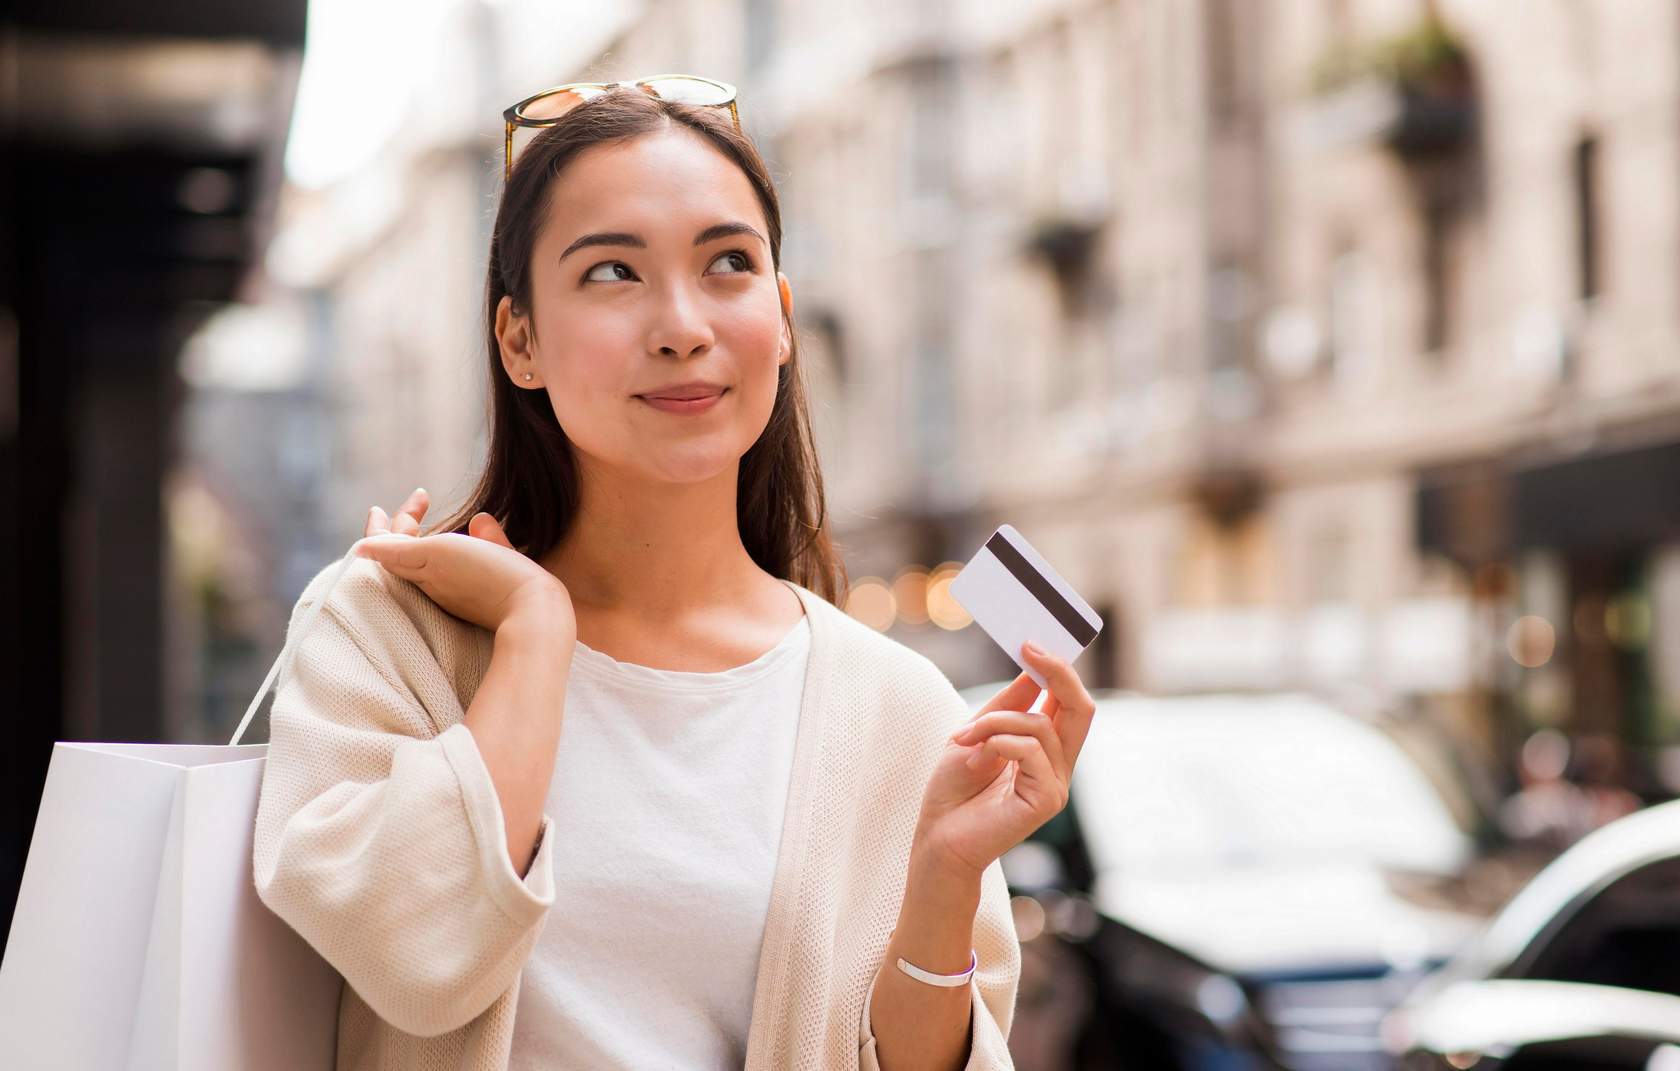 woman-outdoors-holding-credit-card-shopping-bag